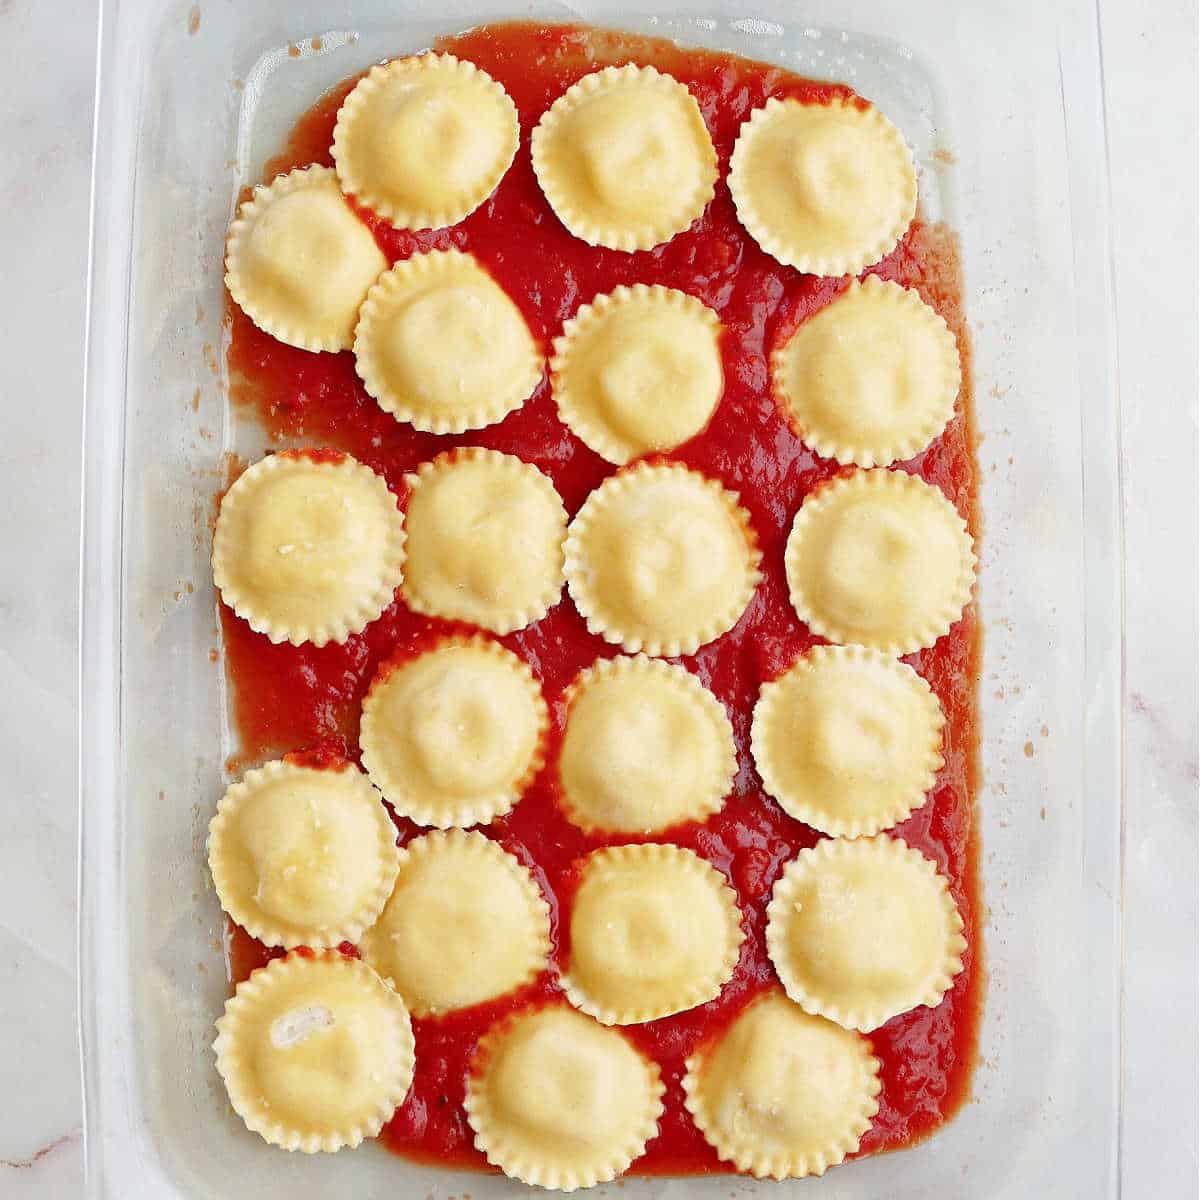 ravioli on top of marinara sauce in a glass baking dish on a counter